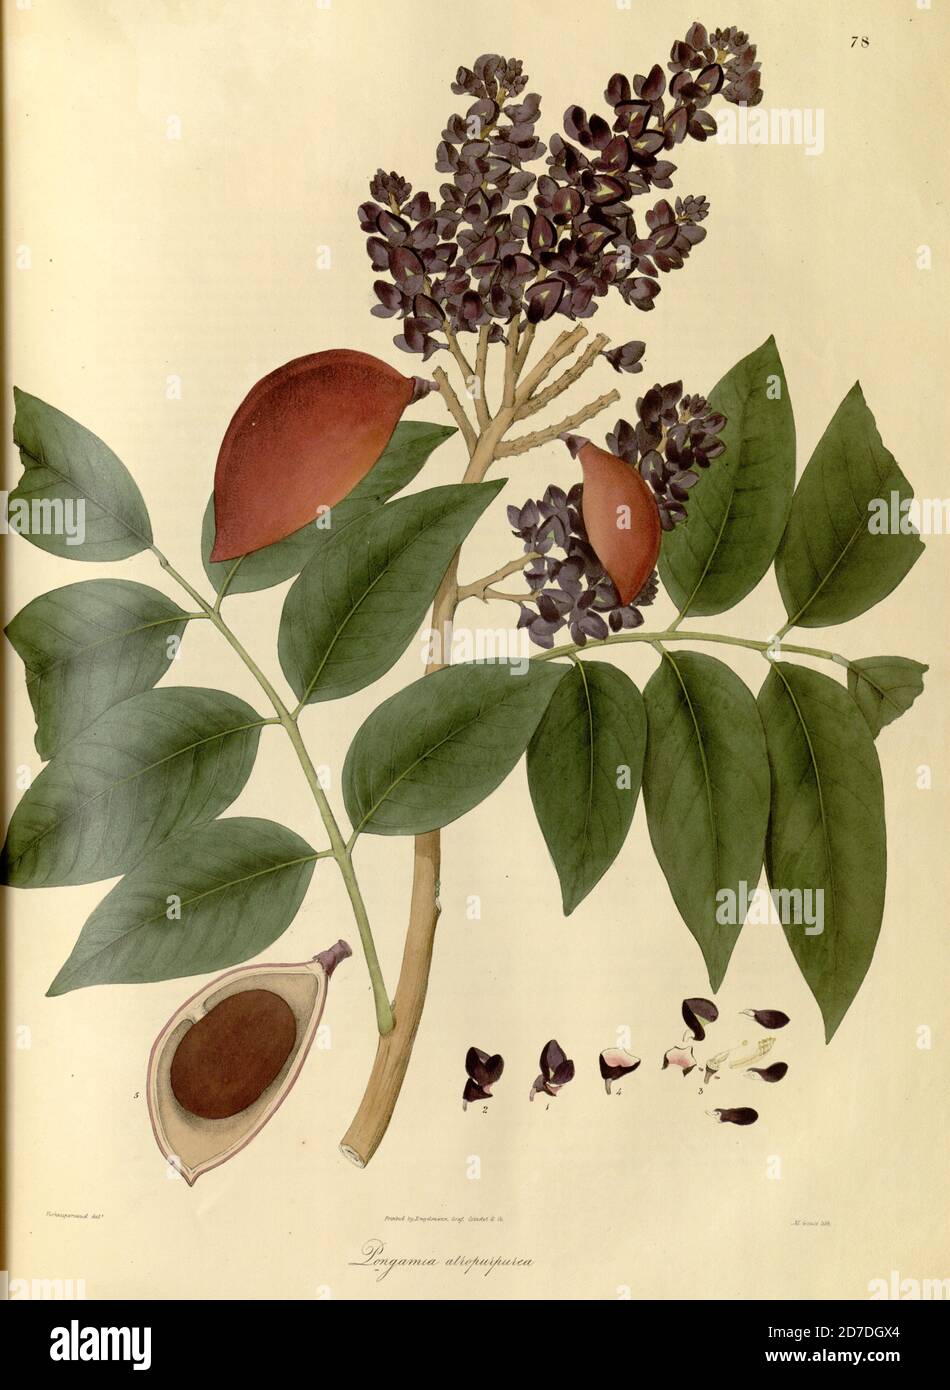 Pongamia atropurpurea [Millettia] From Plantae Asiaticae rariores, or, Descriptions and figures of a select number of unpublished East Indian plants Volume 1 by N. Wallich. Nathaniel Wolff Wallich FRS FRSE (28 January 1786 – 28 April 1854) was a surgeon and botanist of Danish origin who worked in India, initially in the Danish settlement near Calcutta and later for the Danish East India Company and the British East India Company. He was involved in the early development of the Calcutta Botanical Garden, describing many new plant species and developing a large herbarium collection which was dis Stock Photo